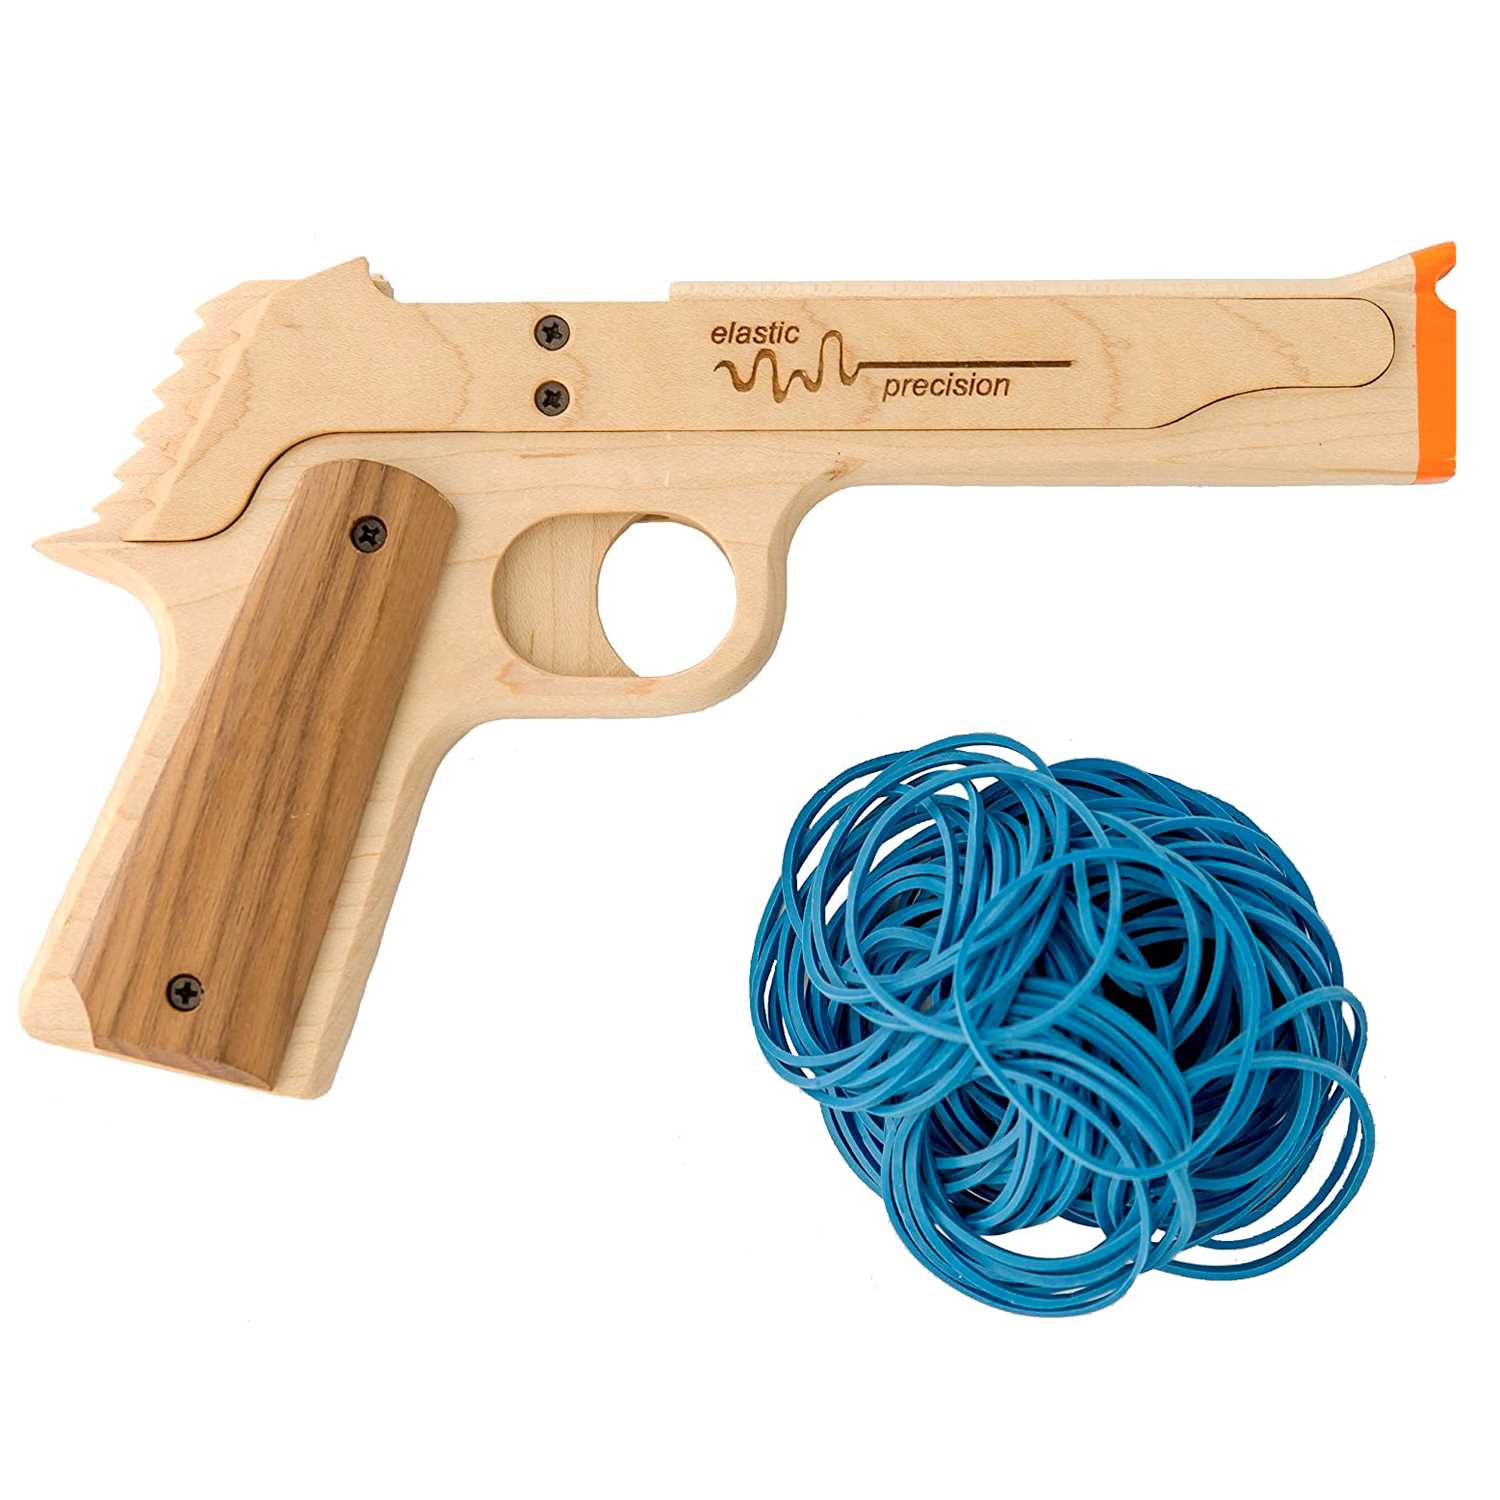 Semi-Automatic Six Shooter Rubber Band Gun Close Up - Perfect Birthday Gift For Boss